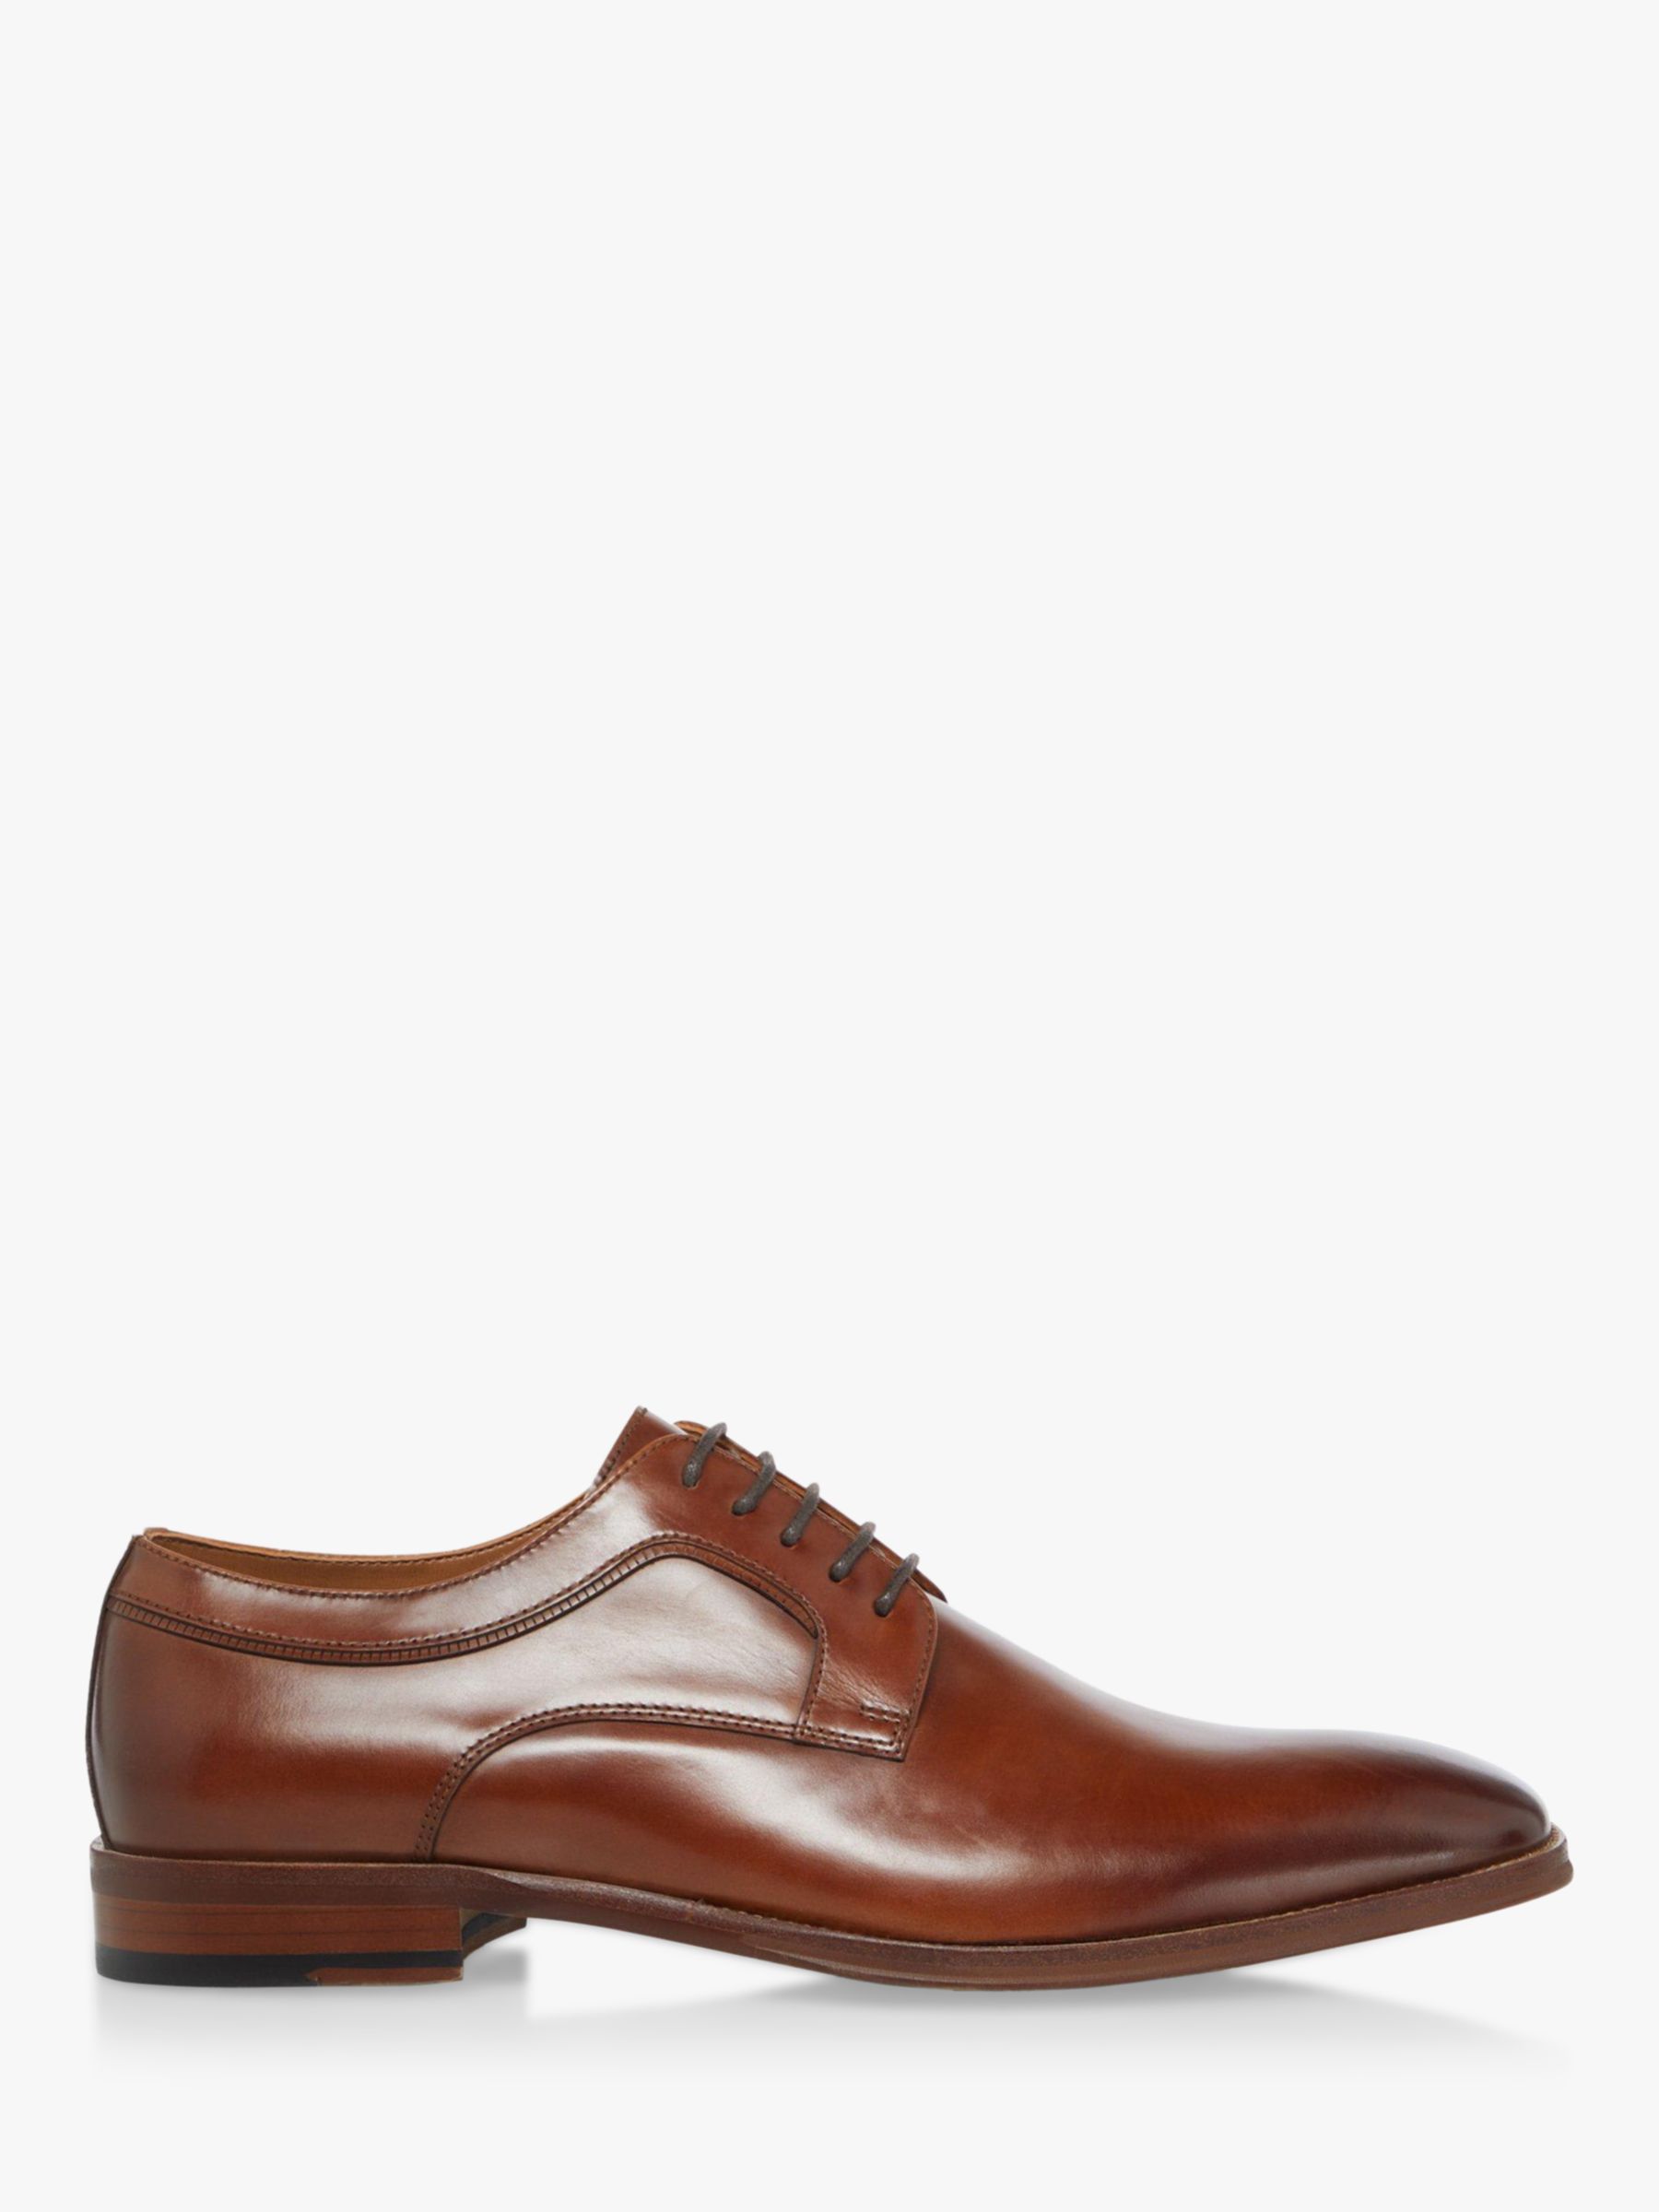 Dune Sparrows Leather Gibson Shoes, Tan at John Lewis & Partners